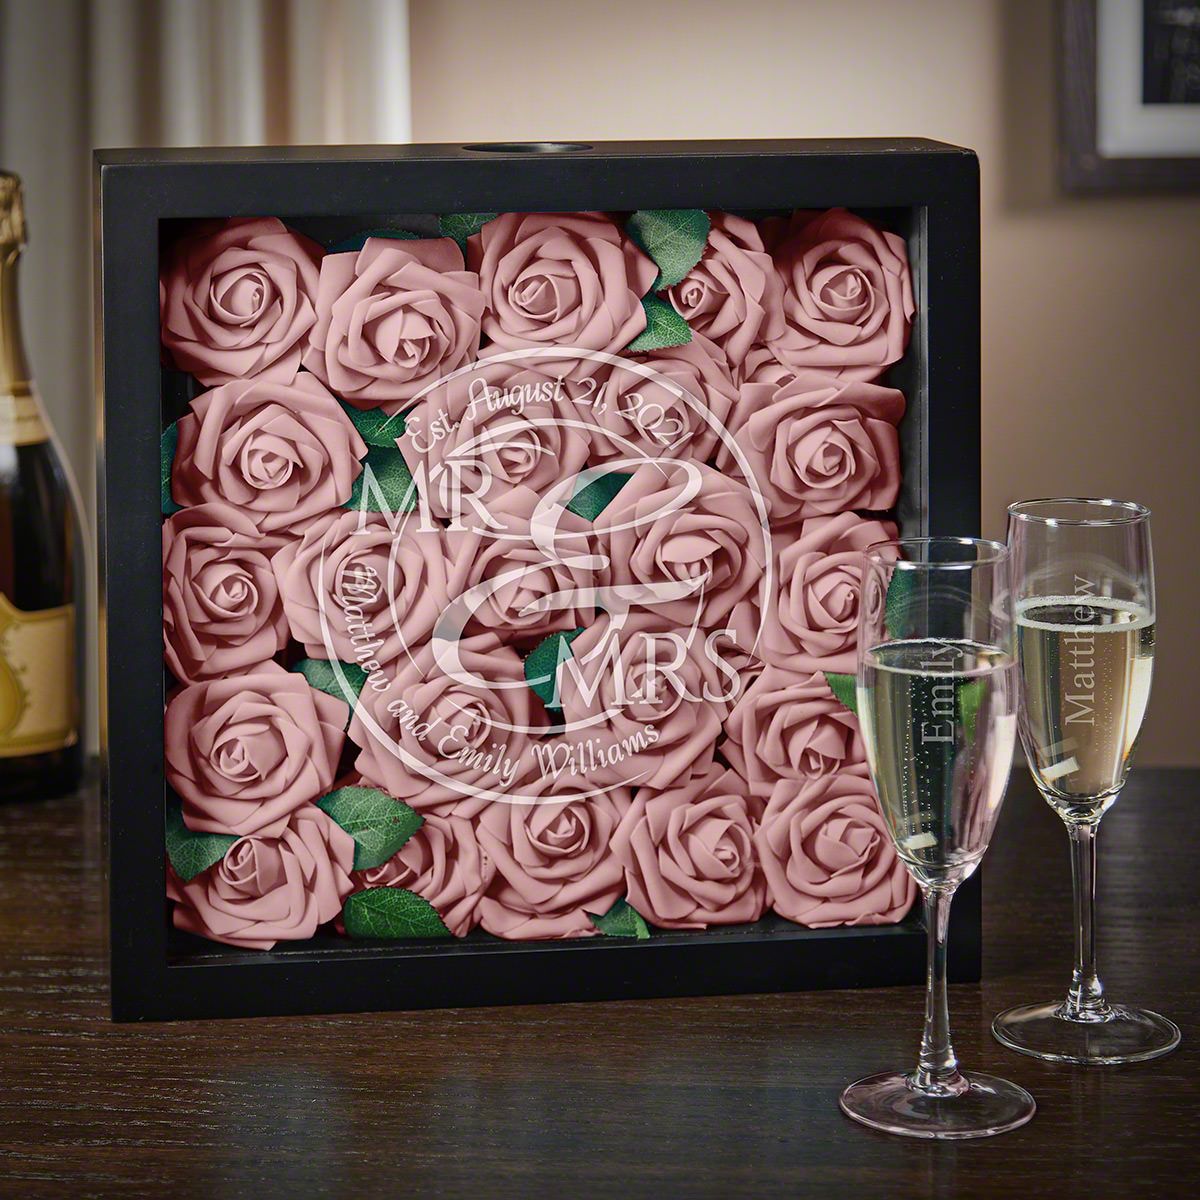 When Love Comes Together Personalized Shadow Box & Champagne Flutes Wedding Gift Ideas